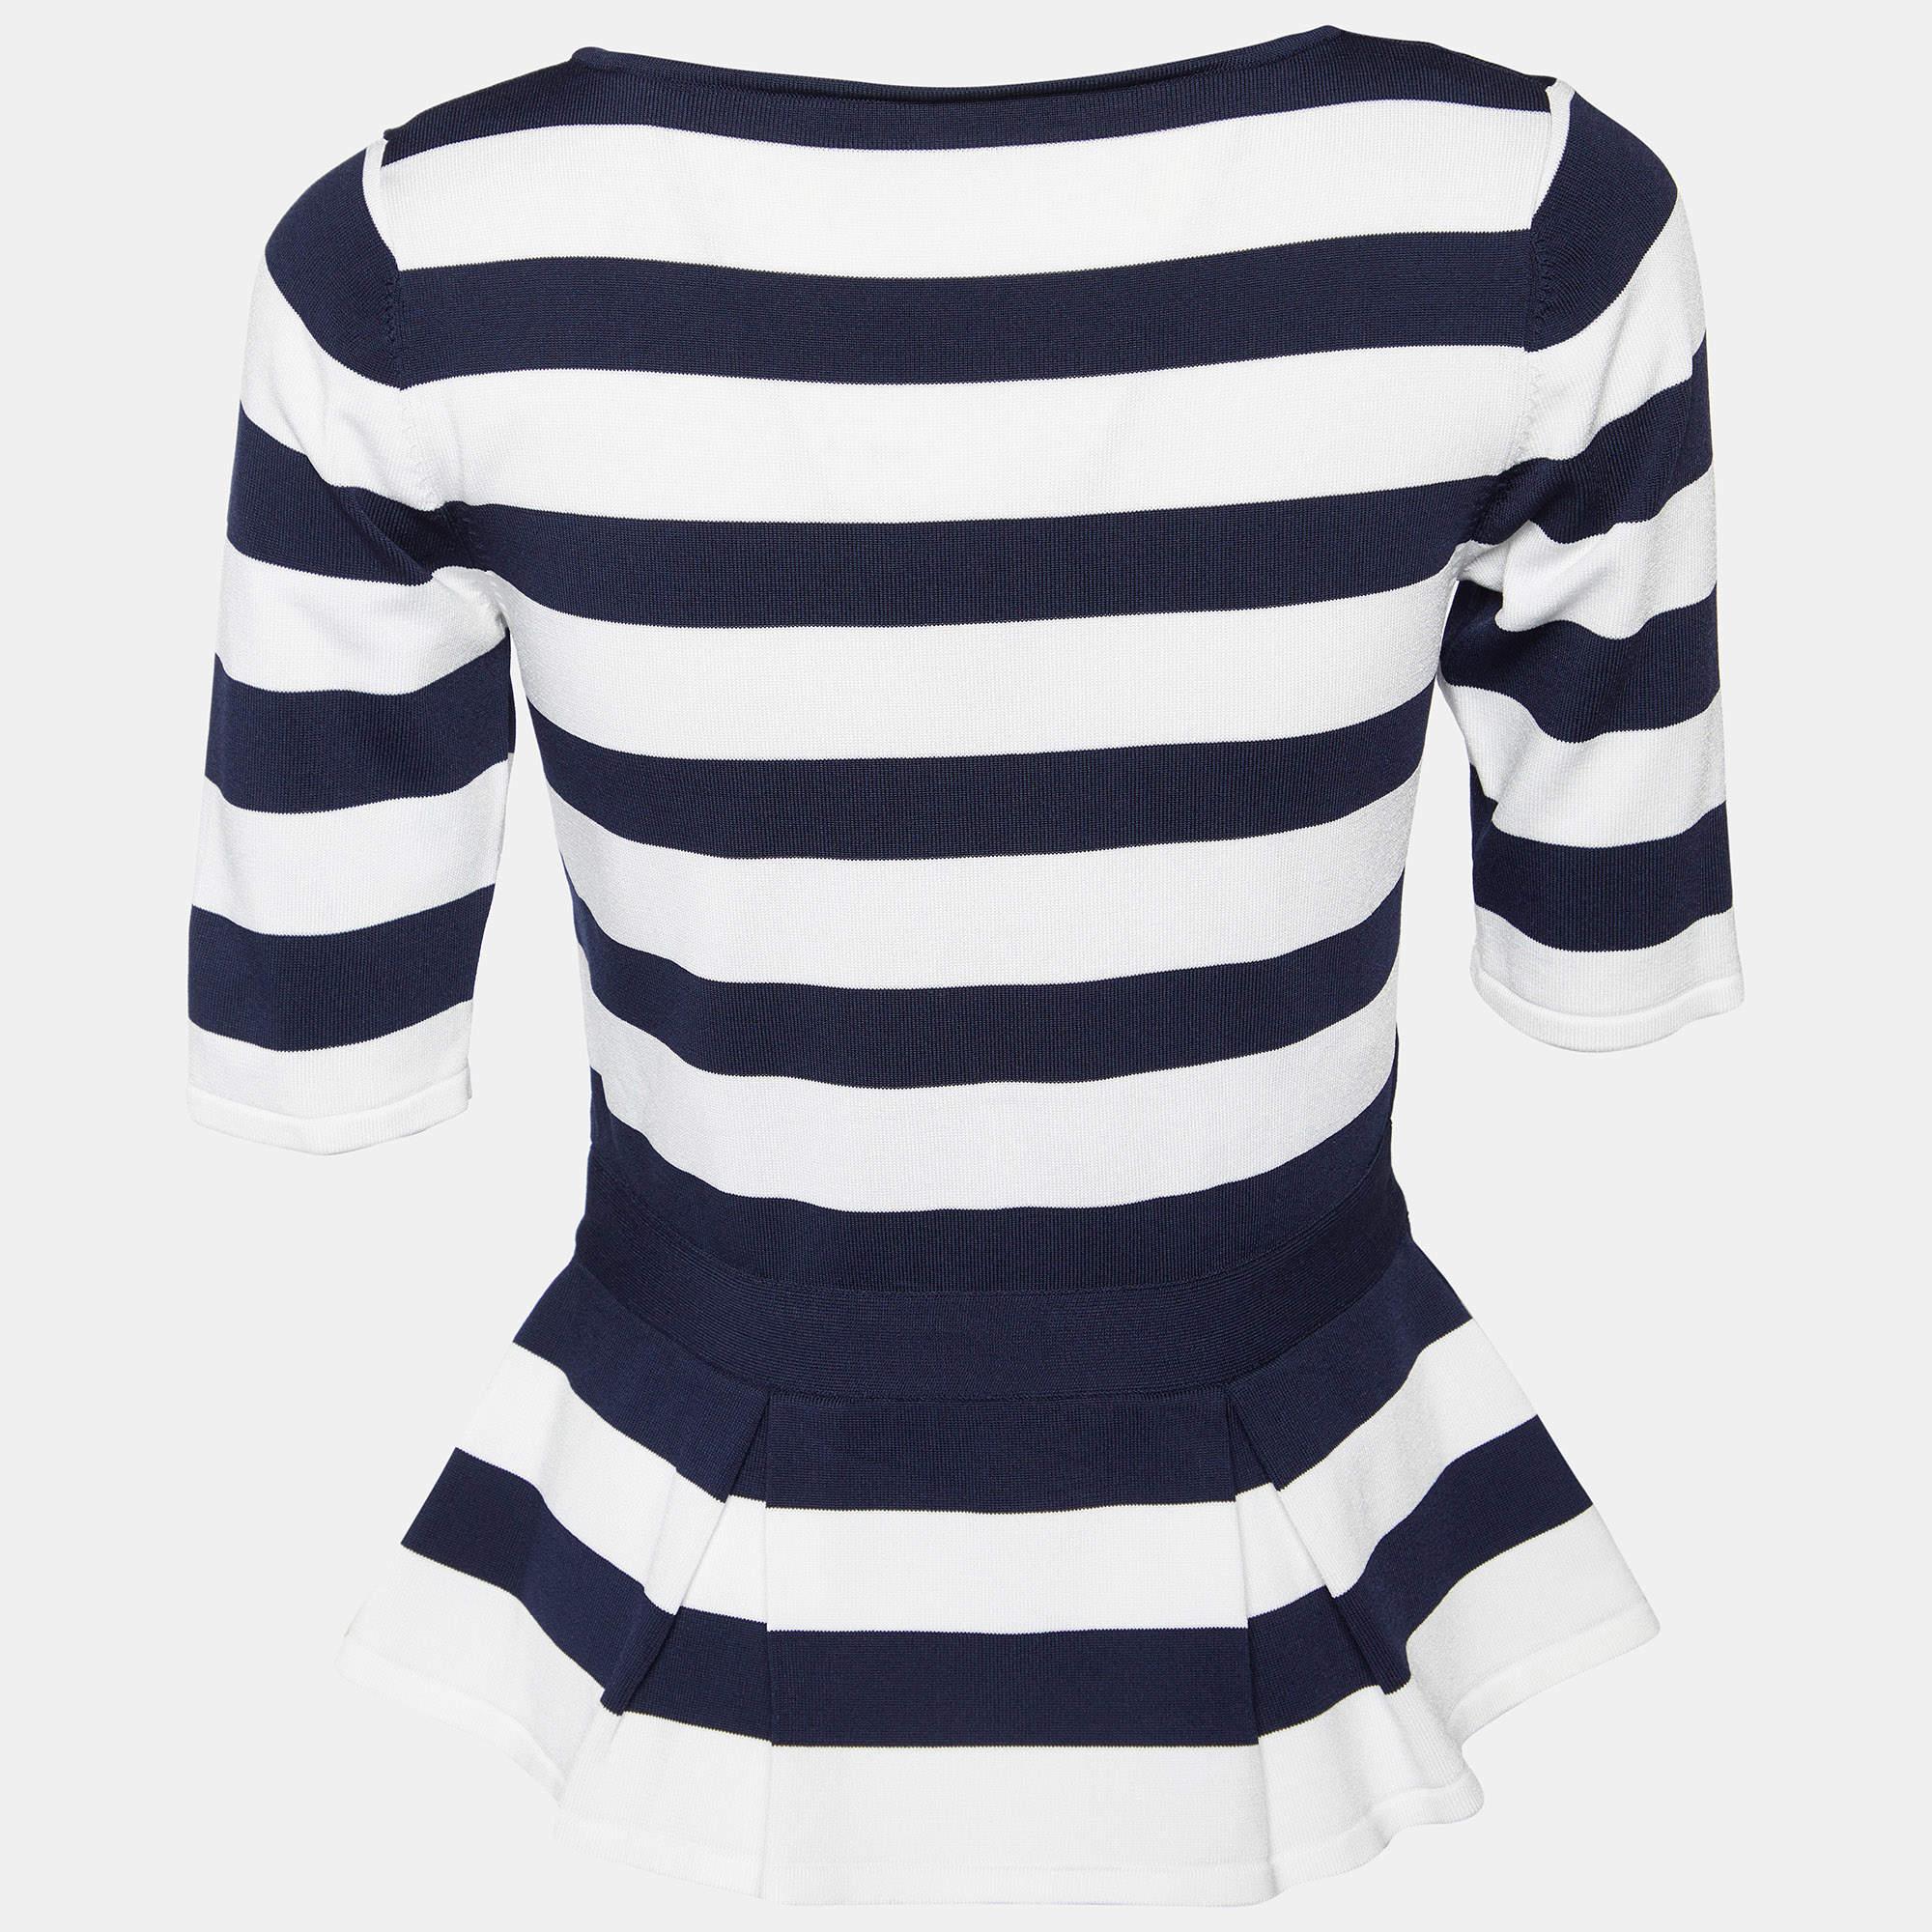 The CH Carolina Herrera top exudes timeless elegance. Crafted with precision, its navy blue and white stripes evoke a nautical charm, while the peplum silhouette adds a flattering flourish. This sophisticated piece seamlessly blends sophistication